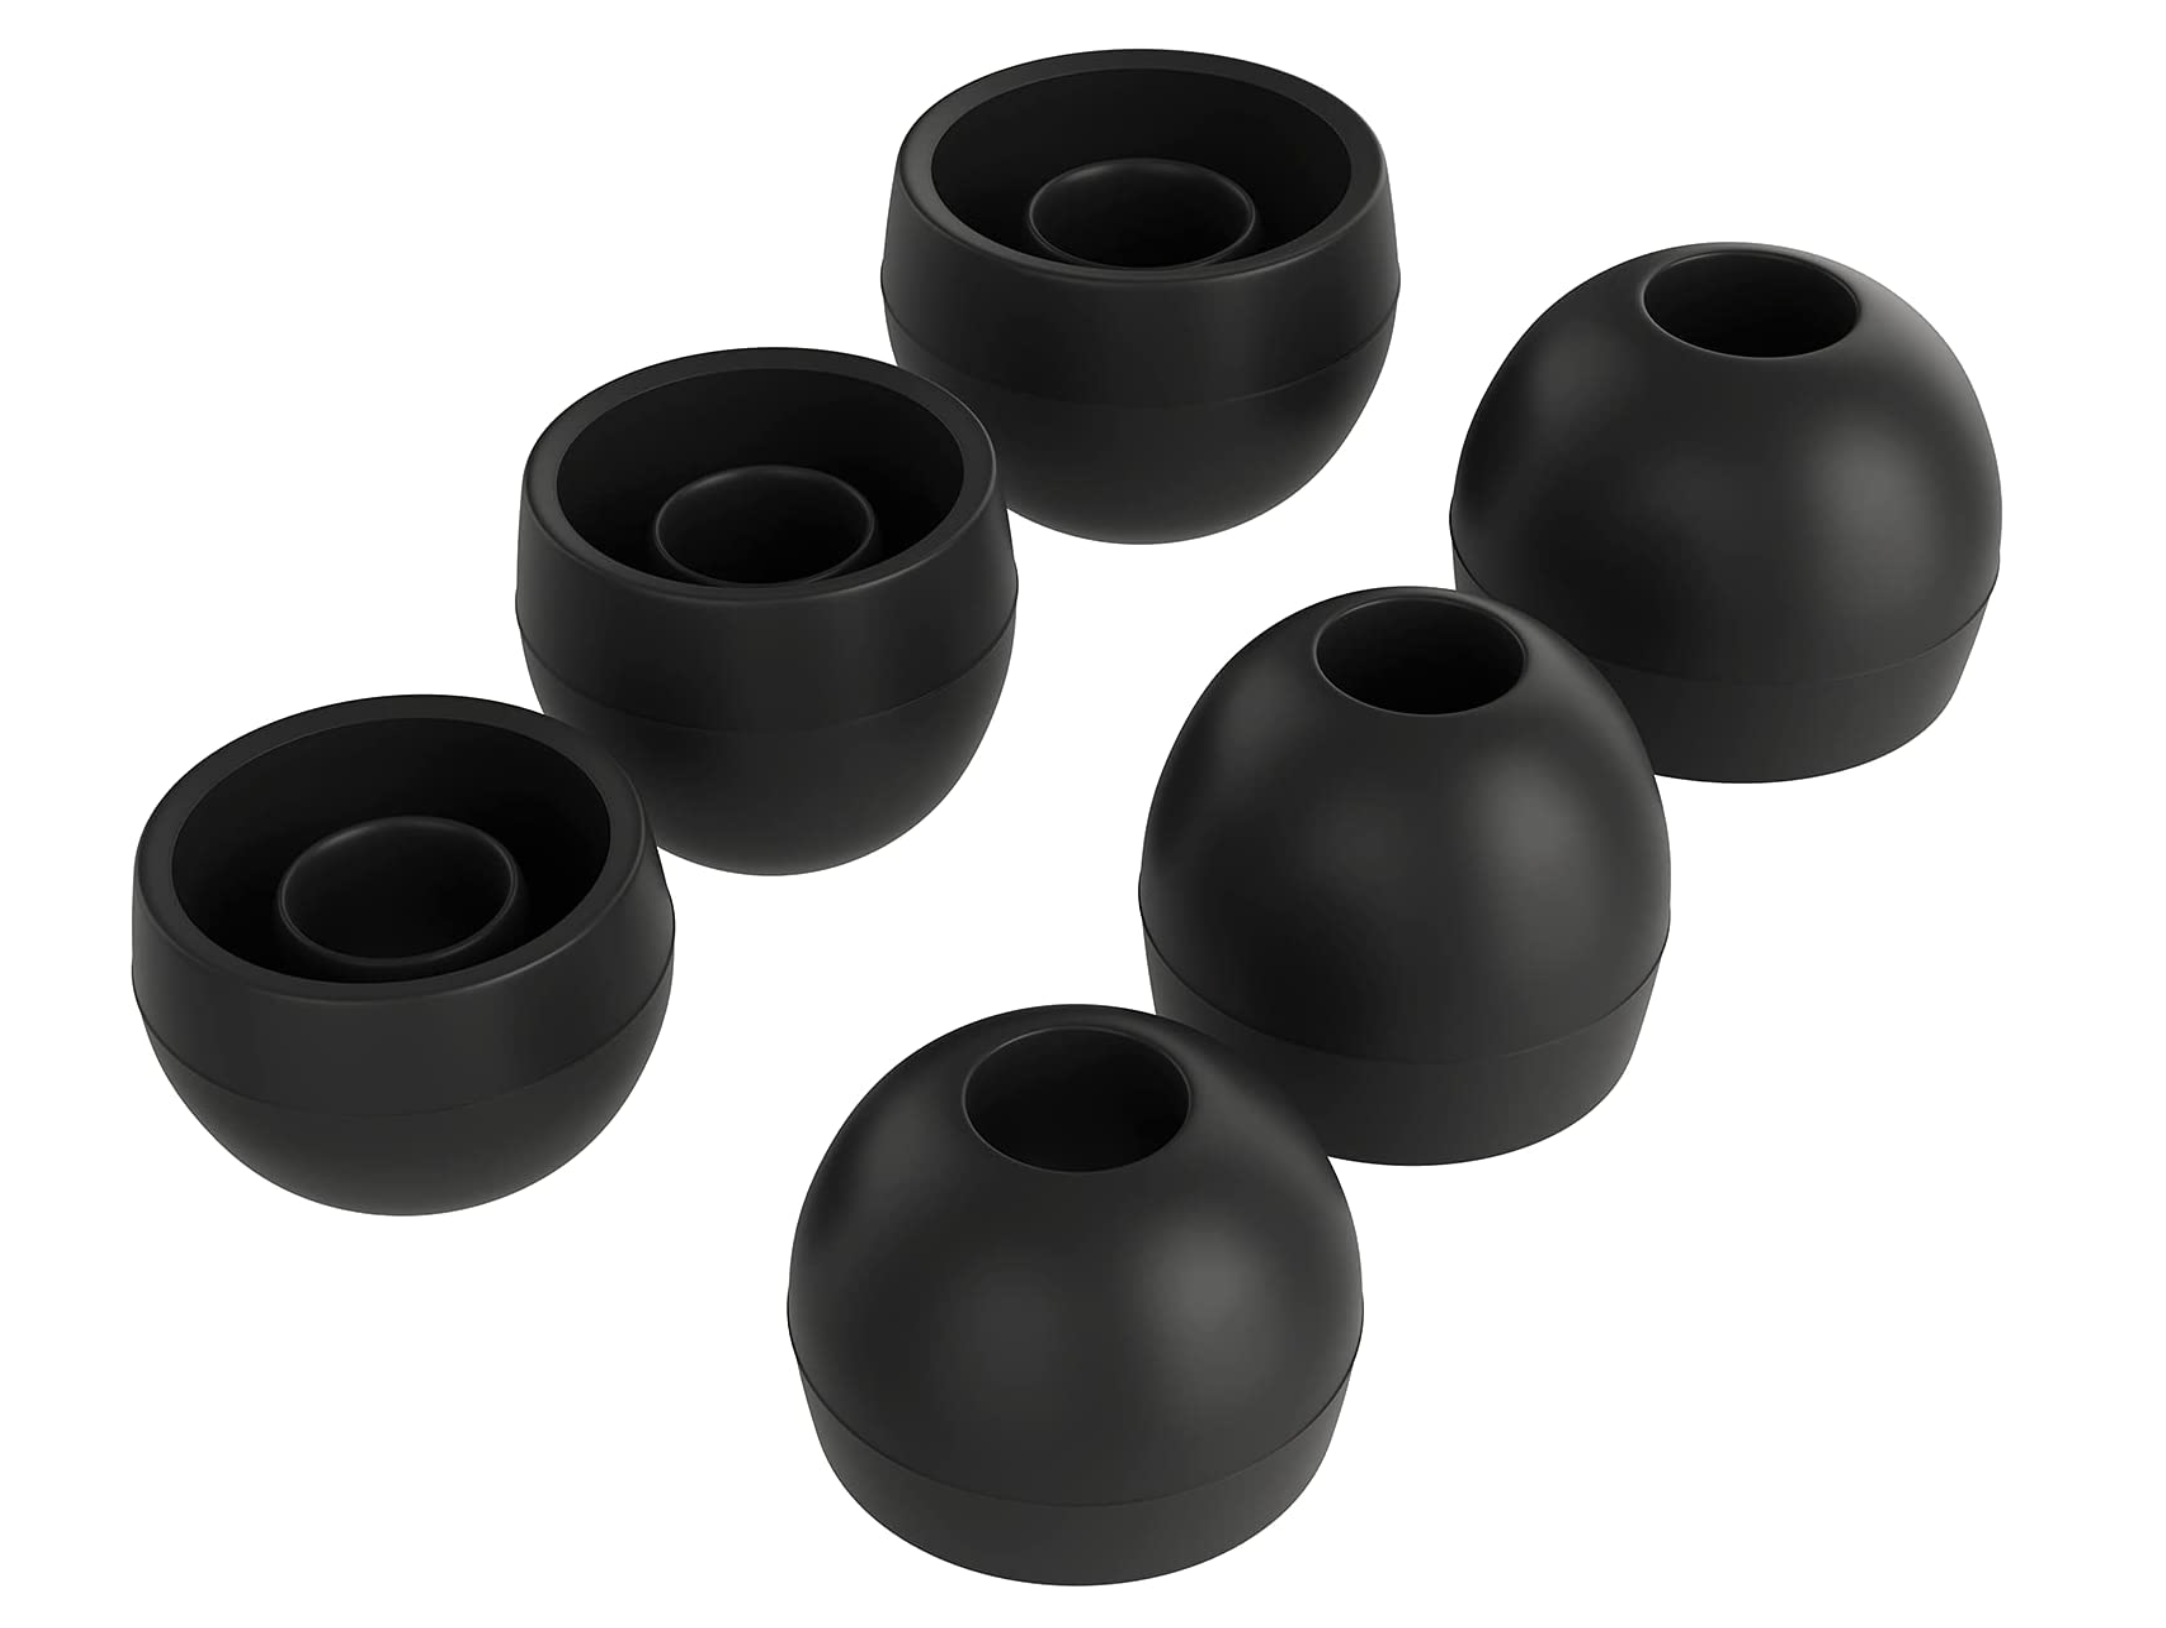 Fixim - Silicone Spare caps / Eartips for in-ear headphones and monitors